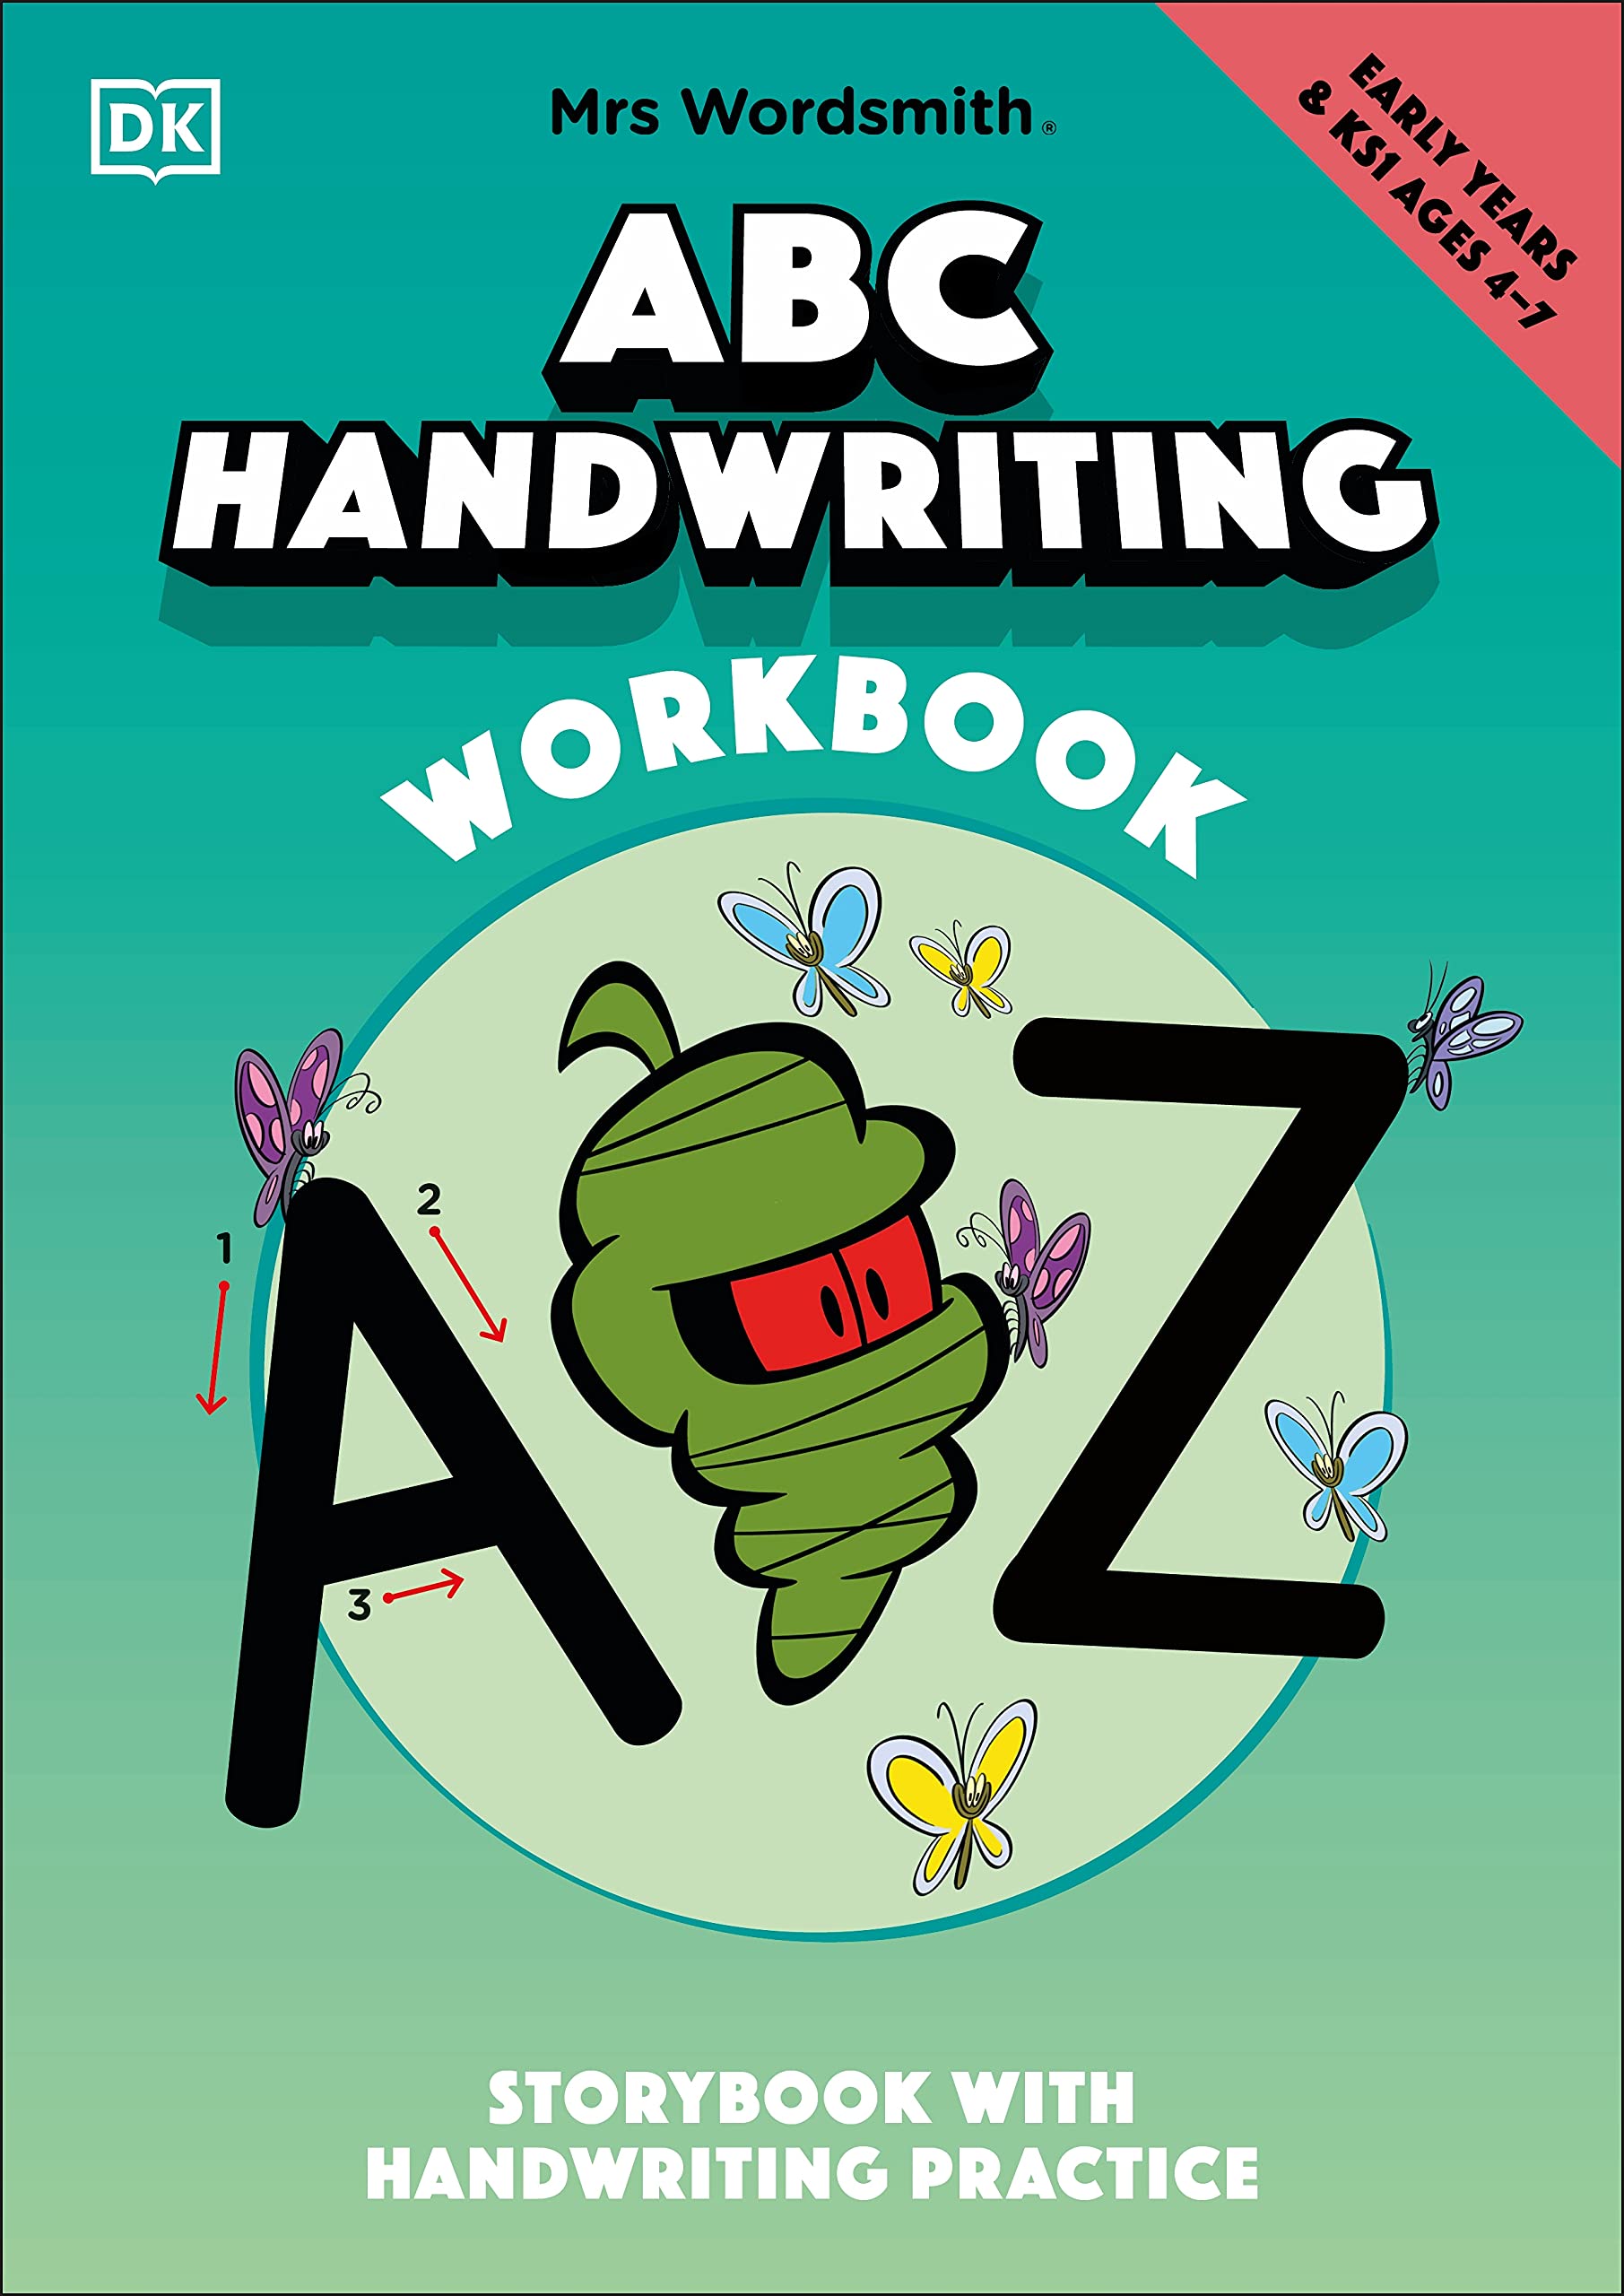 Mrs Wordsmith ABC Handwriting Book, Ages 4-7